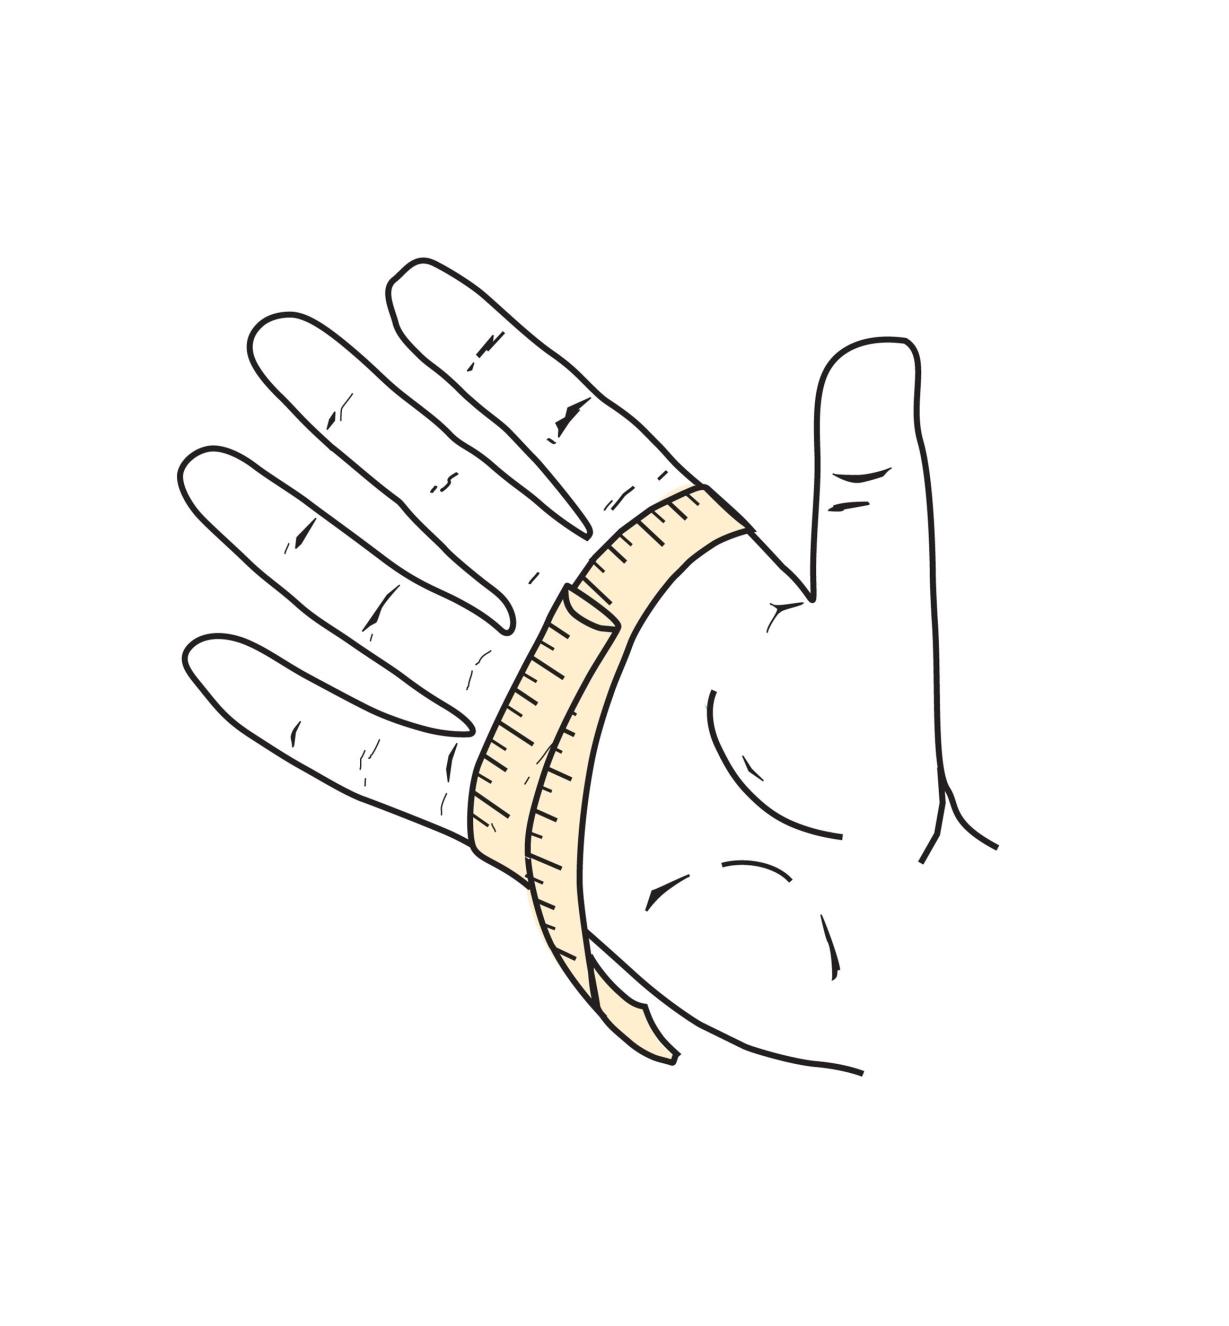 Illustration of hand with measuring tape wrapped around the palm